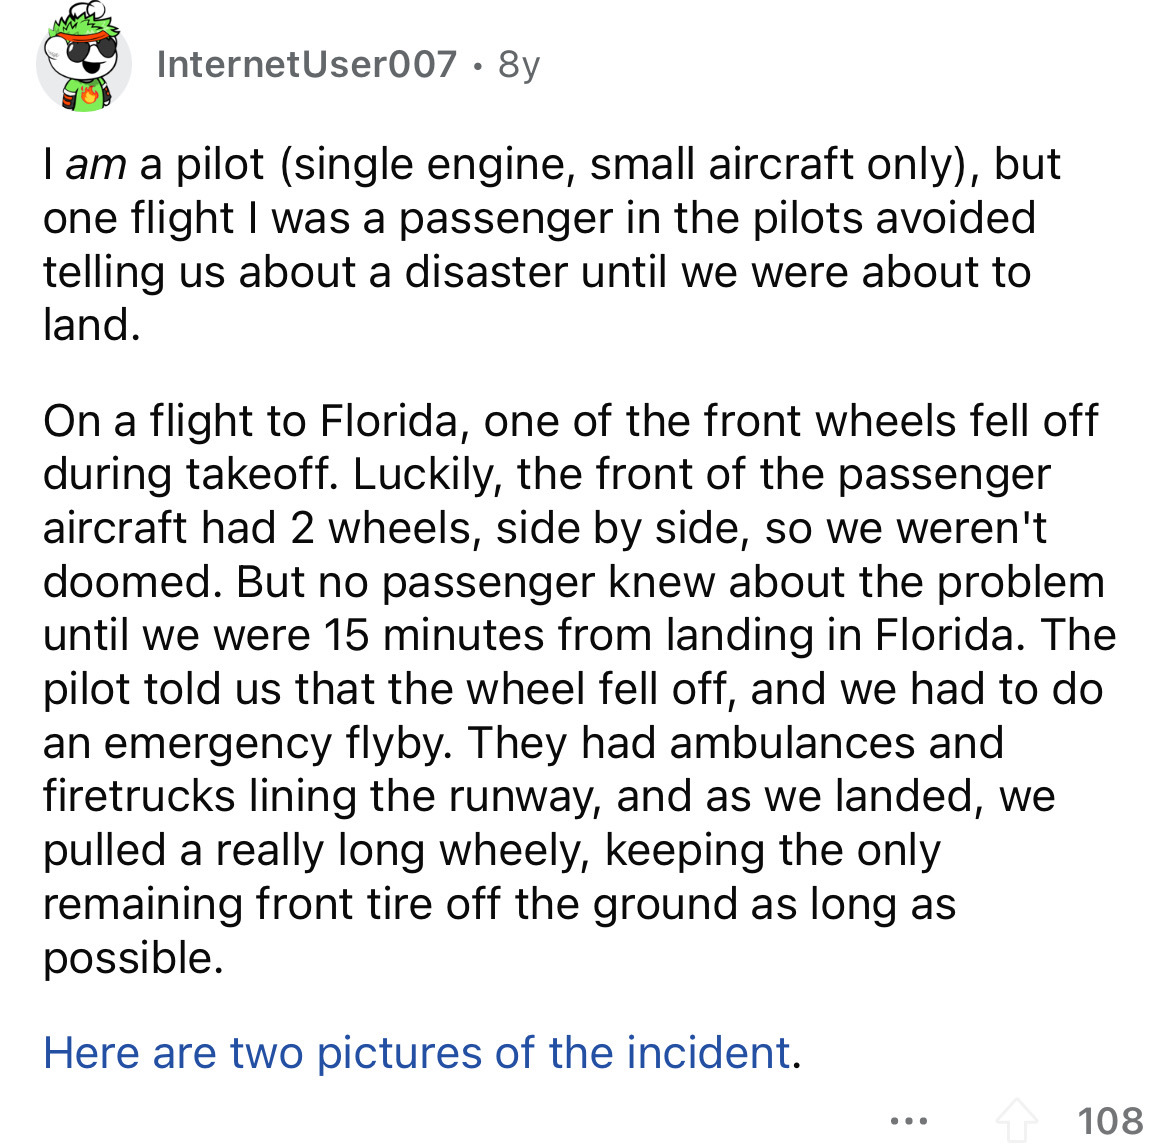 angle - InternetUser007. 8y I am a pilot single engine, small aircraft only, but one flight I was a passenger in the pilots avoided telling us about a disaster until we were about to land. On a flight to Florida, one of the front wheels fell off during ta